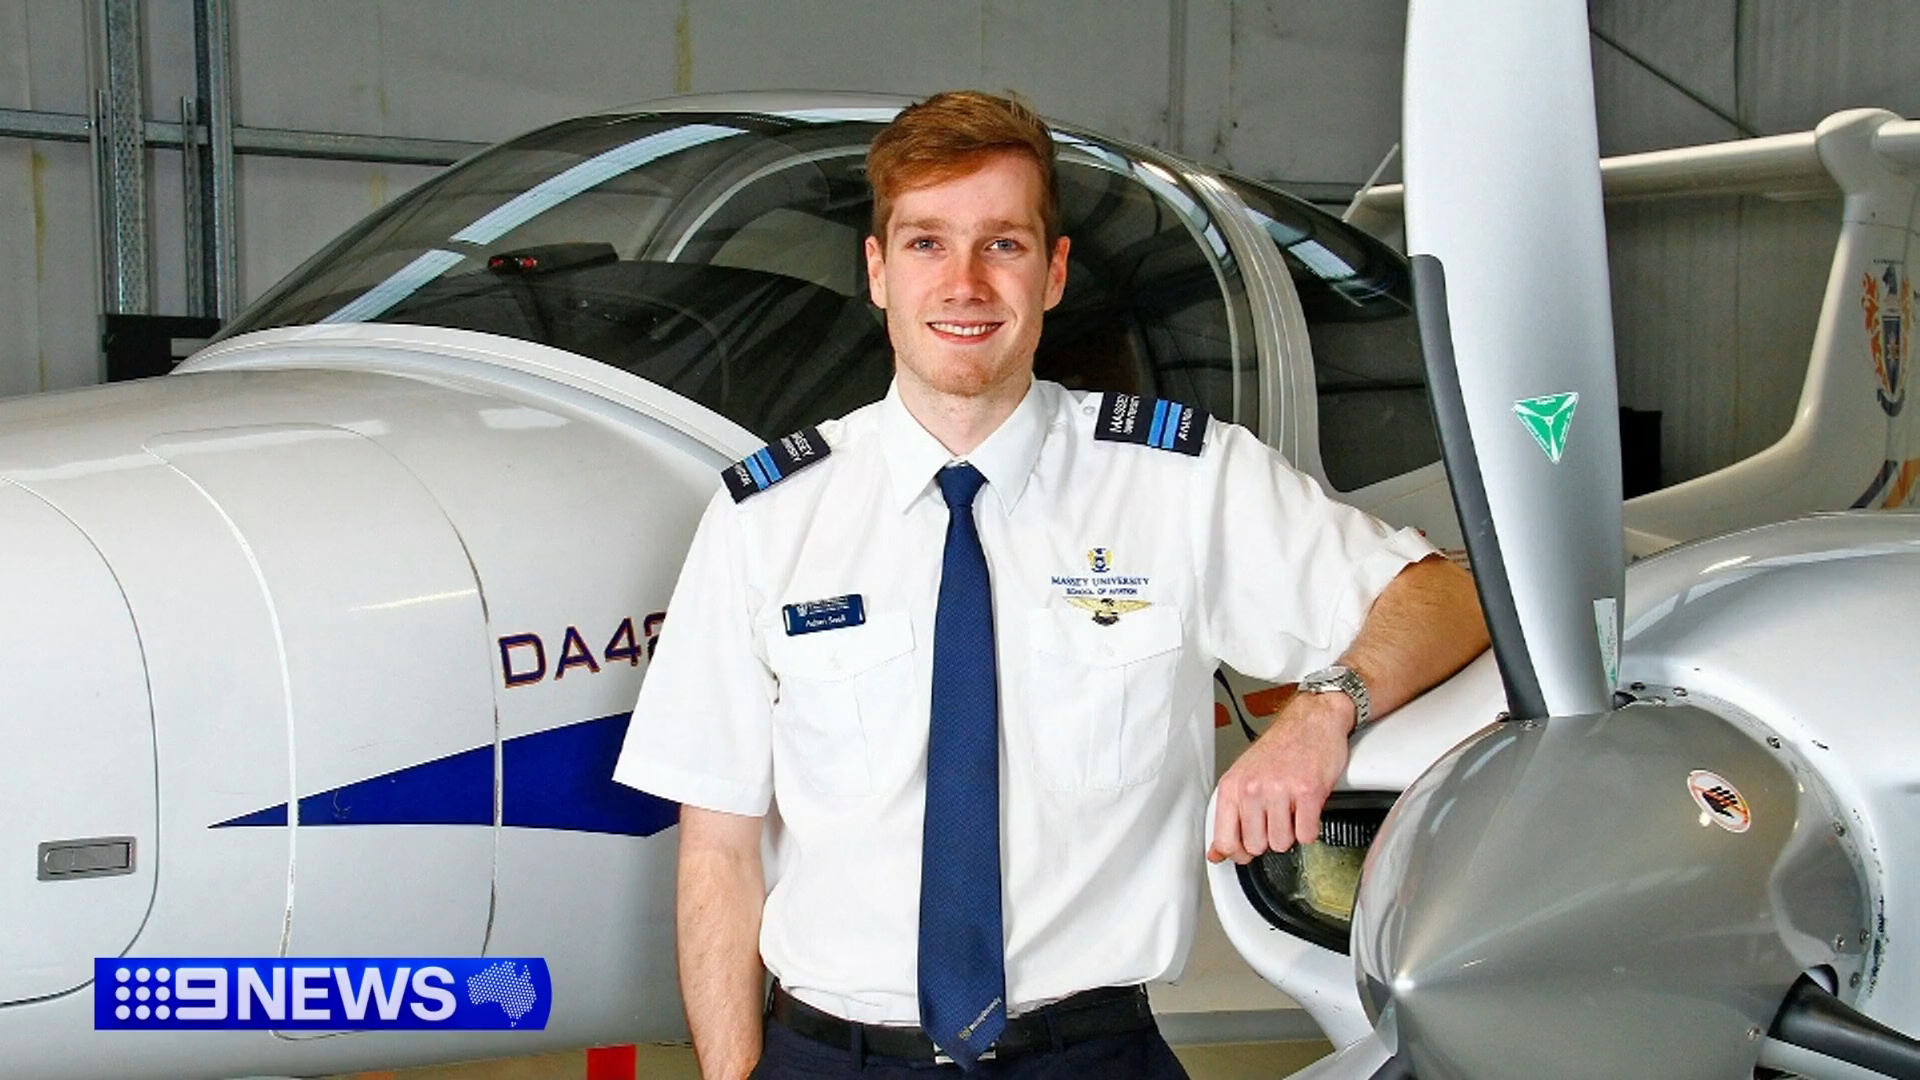 Mother's tribute for young pilot killed in SA crash